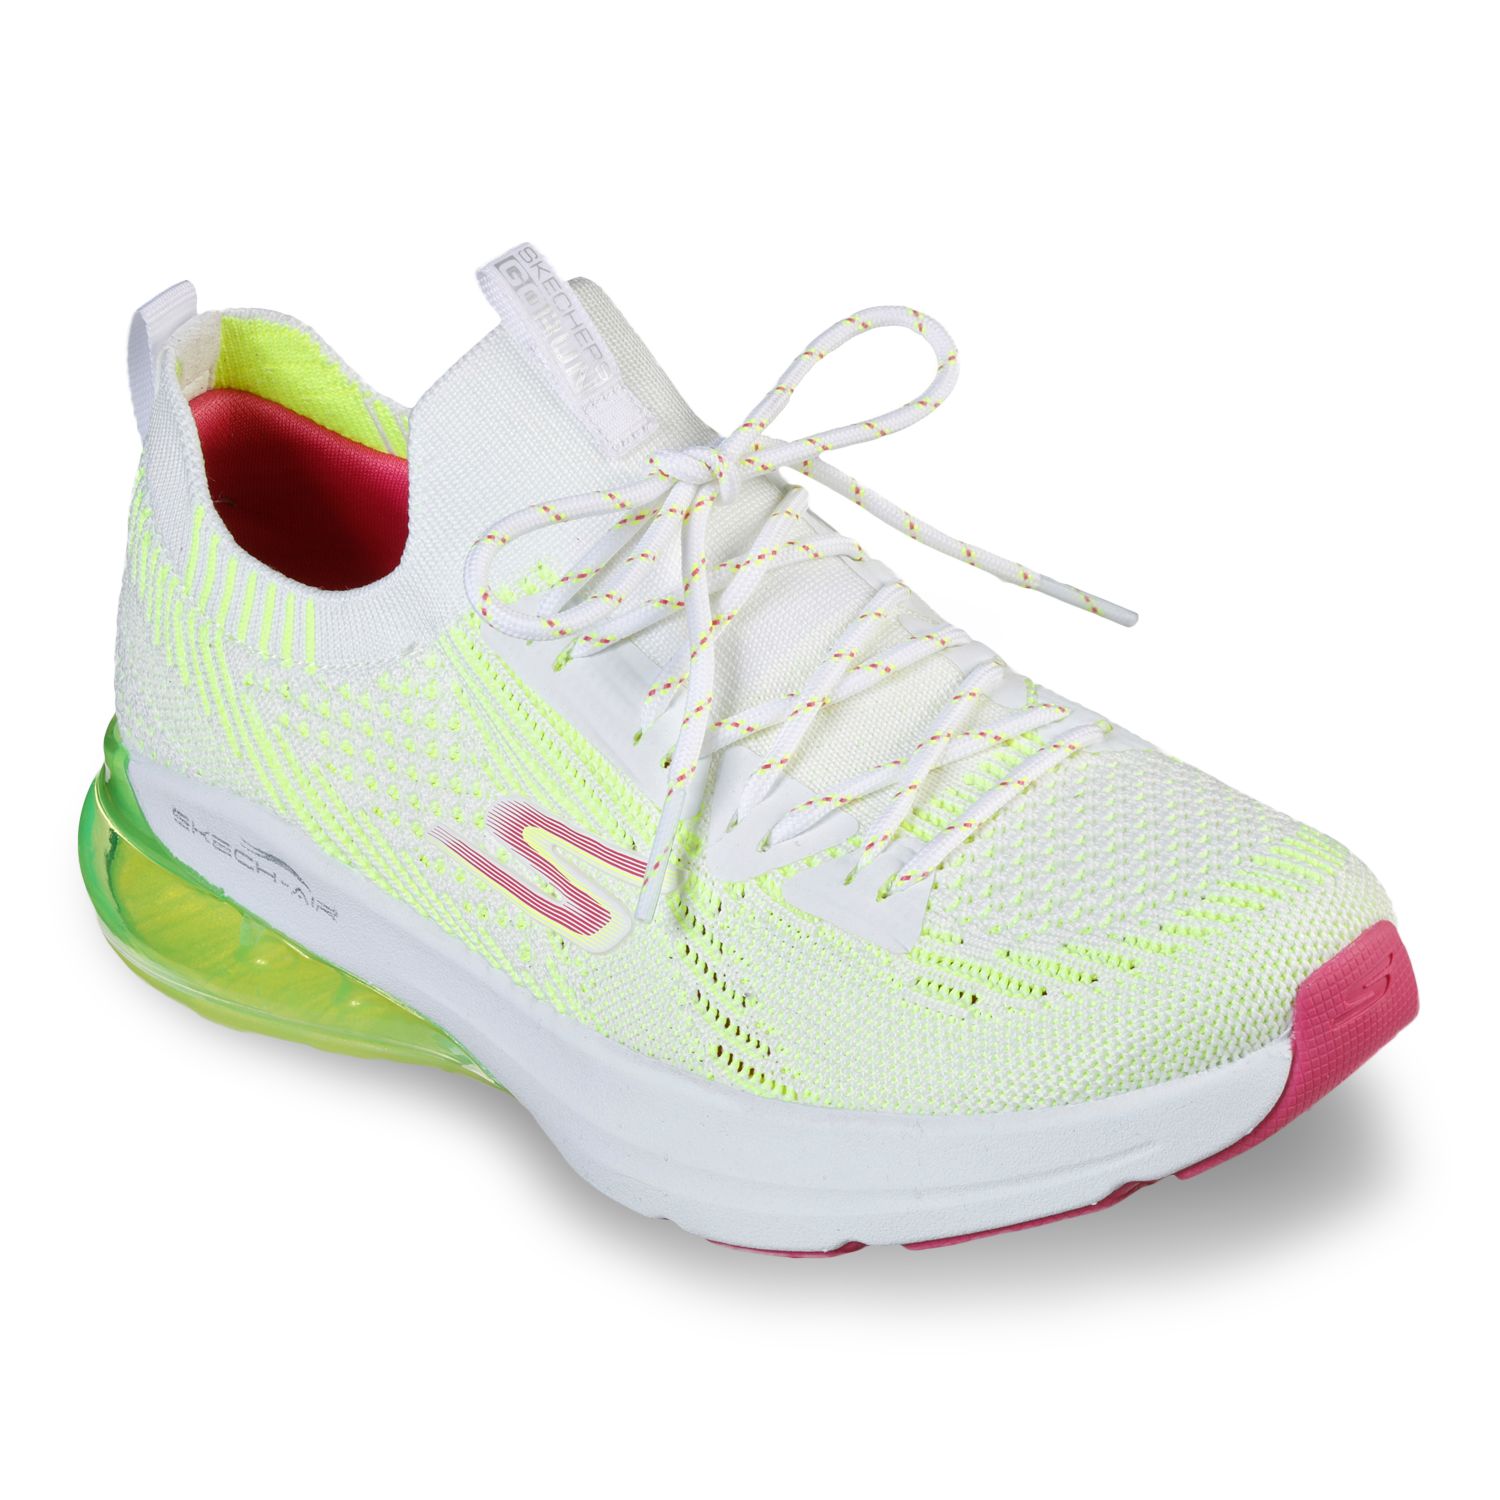 skechers womens athletic shoes